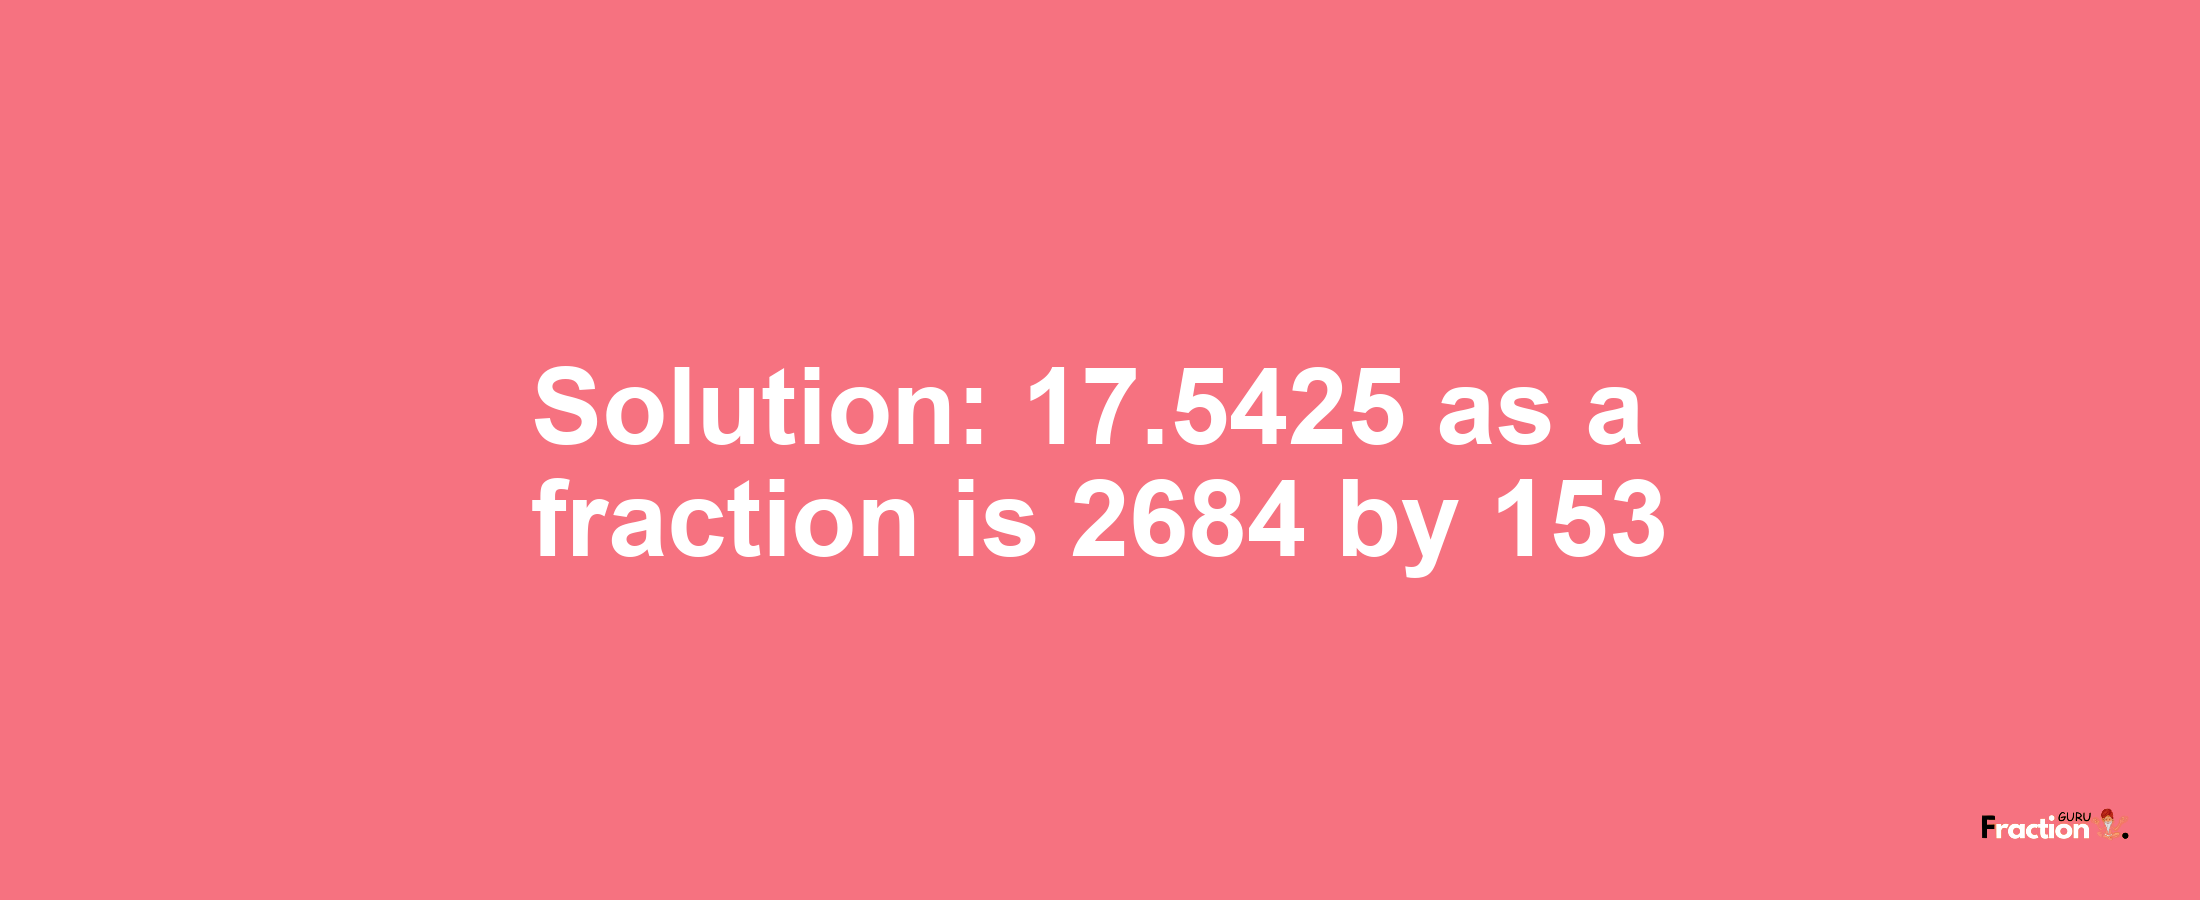 Solution:17.5425 as a fraction is 2684/153